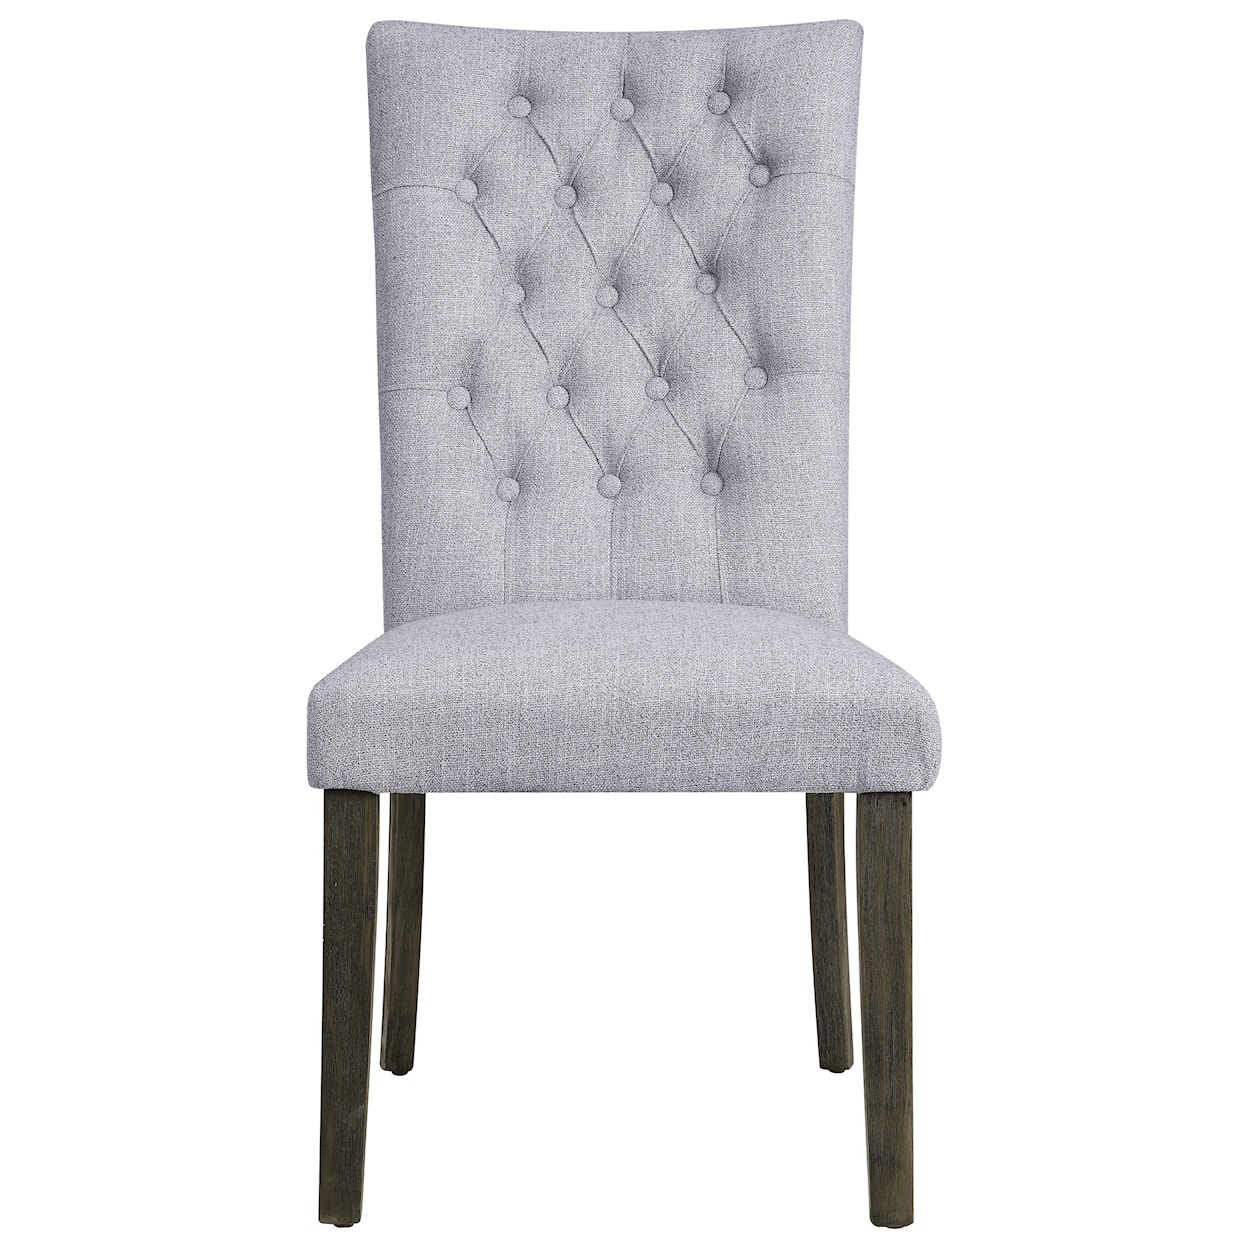 Acme Furniture Merel Side Chair